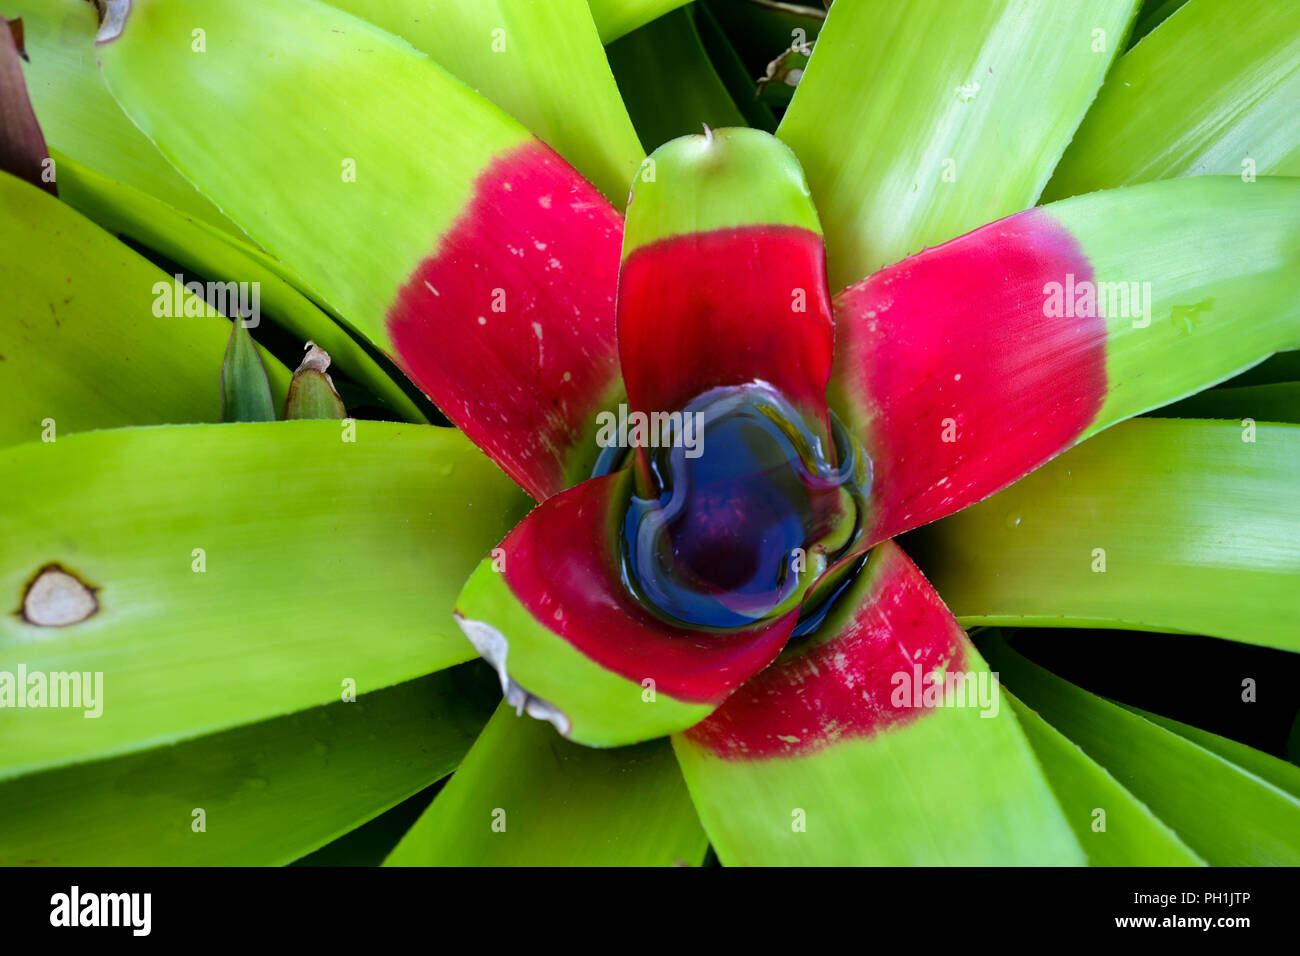 A green and red bromeliad (Neoregelia sp.) in a garden in Kauai, Hawaii, USA. The central well of the bromeliad is filled with water. Stock Photo